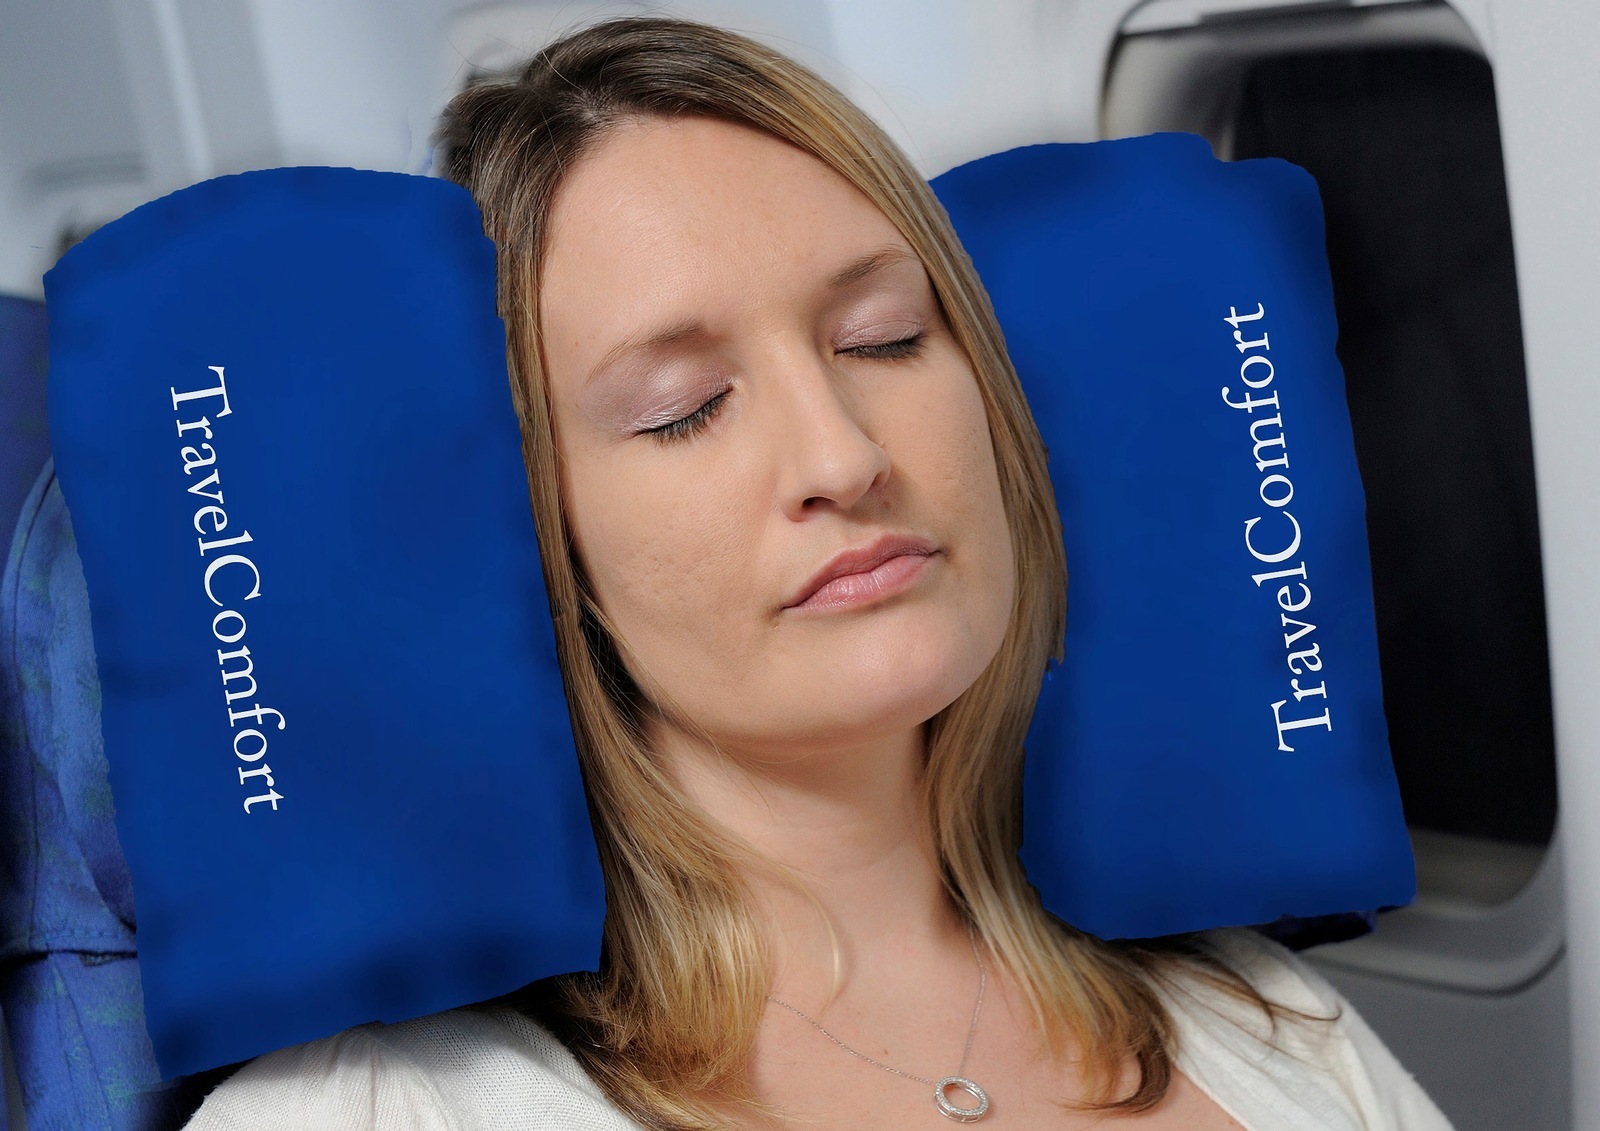 inflatable travel pillow manufacturing